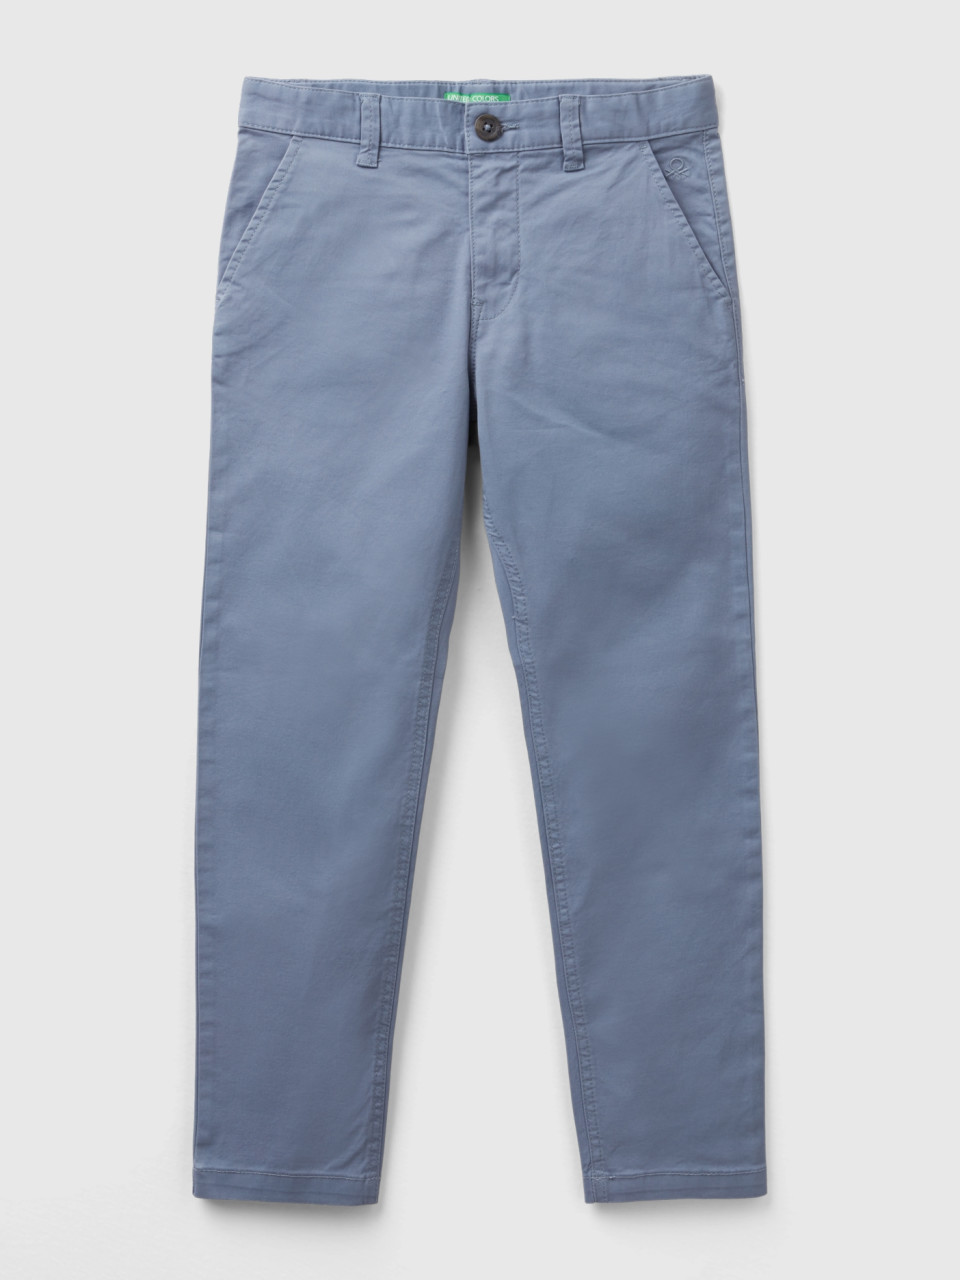 Benetton, Slim Fit Chinos In Stretch Cotton, Air Force Blue, Kids